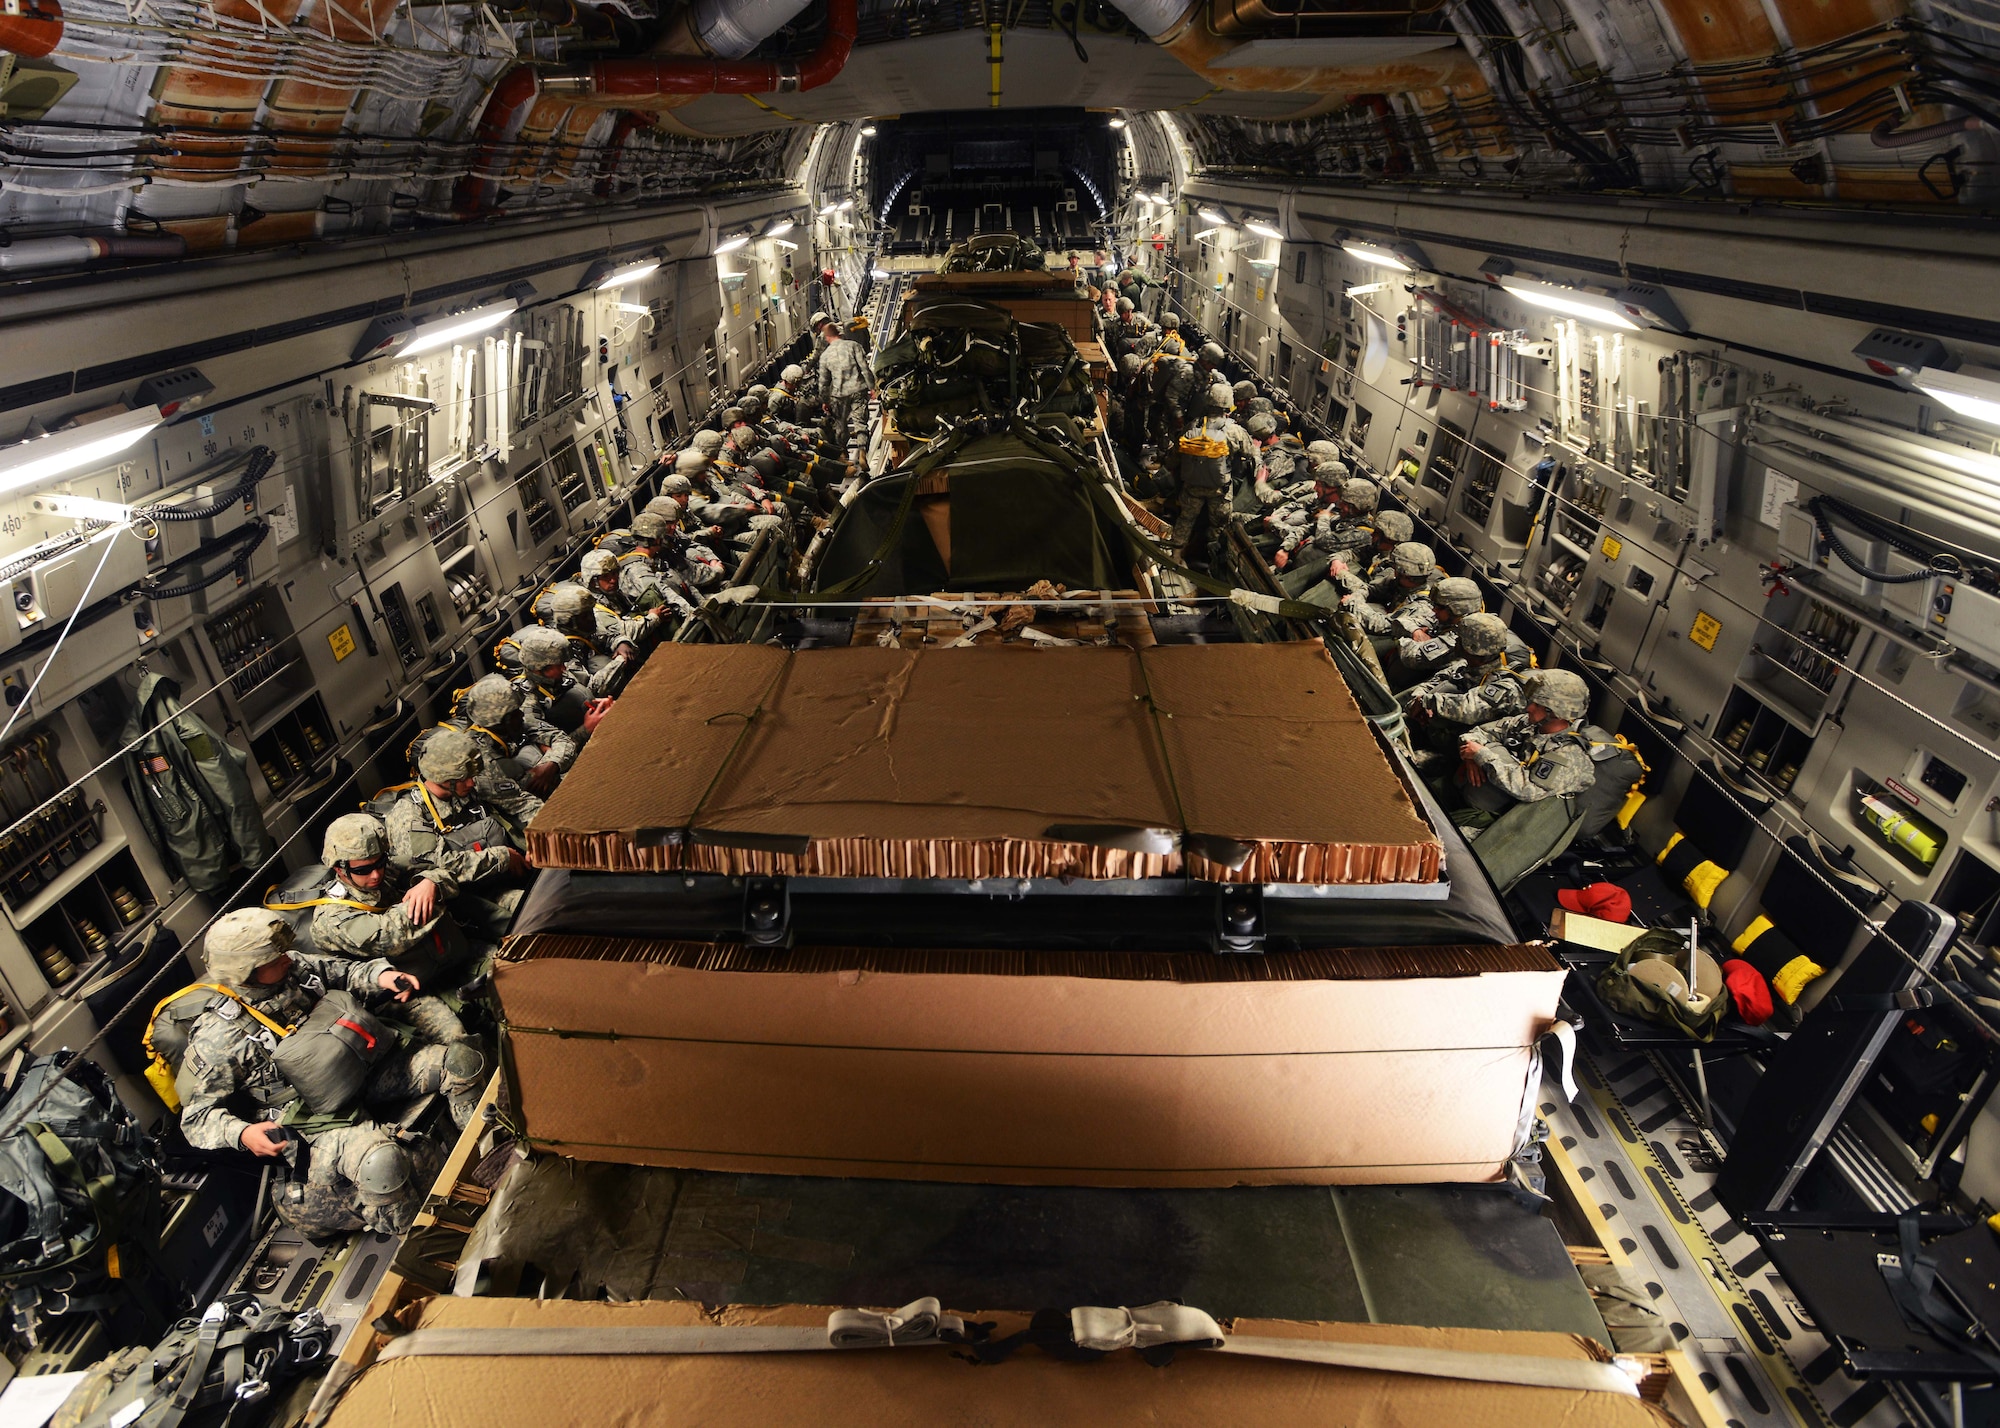 A platoon of approximately 30 airborne field artillery paratroopers from Bravo Battery, 4th Battalion, 319th Airborne Field Artillery Regiment, wait to depart from Aviano Air Base, Italy, May 12, 2014, on a C-17 Globemaster III. The platoon deployed to Poland in support of U.S. Army Europe’s Land Forces Assurance exercises. (U.S. Air Force photo/Airman 1st Class Deana Heitzman)